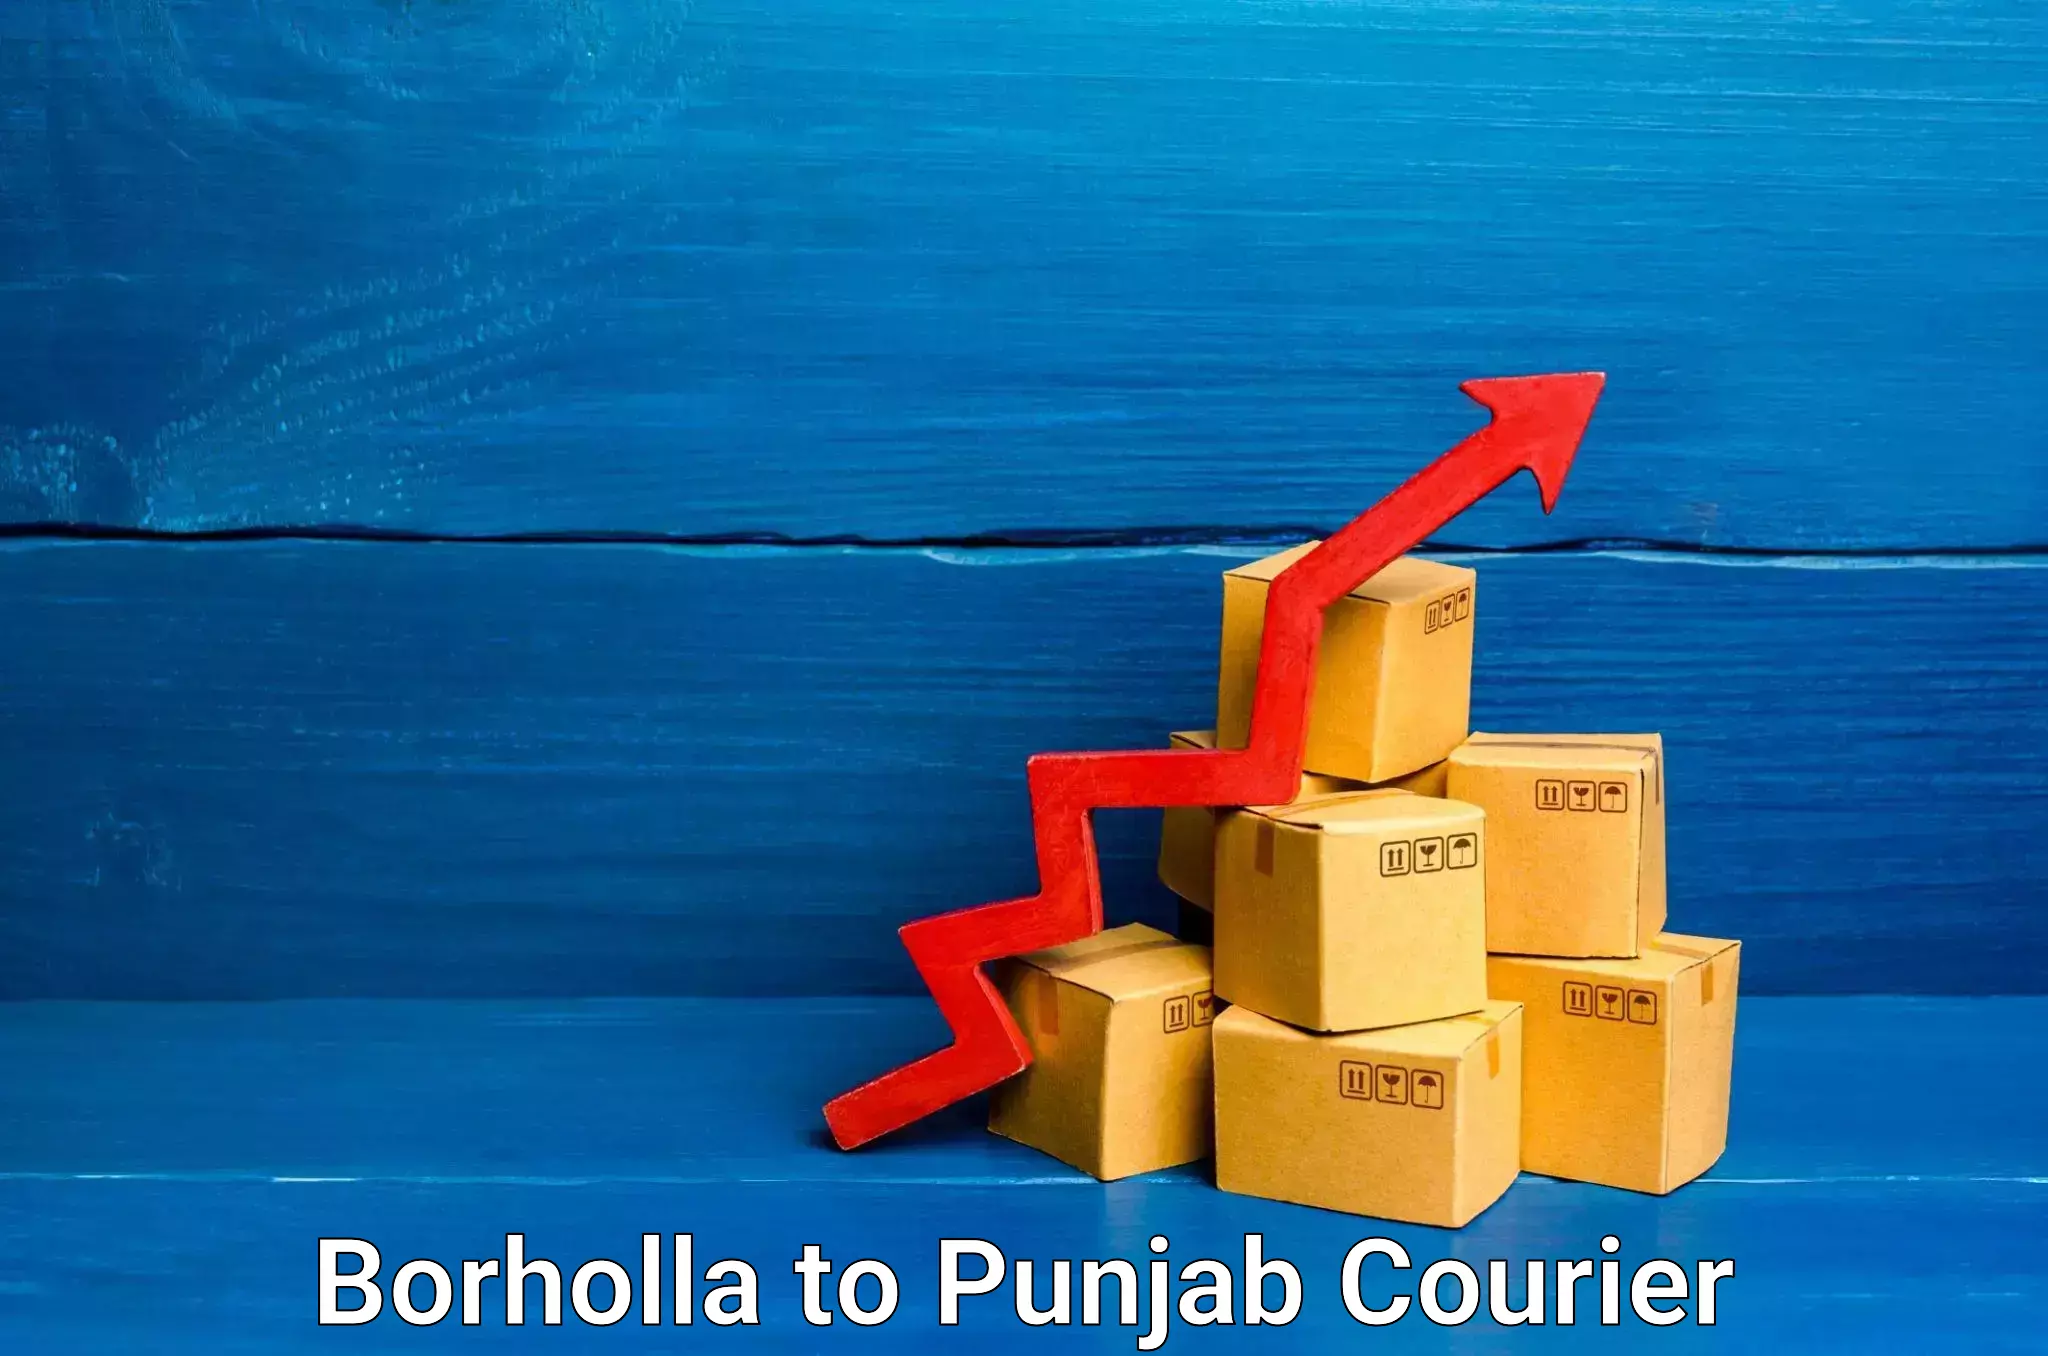 Weekend courier service Borholla to Muktsar